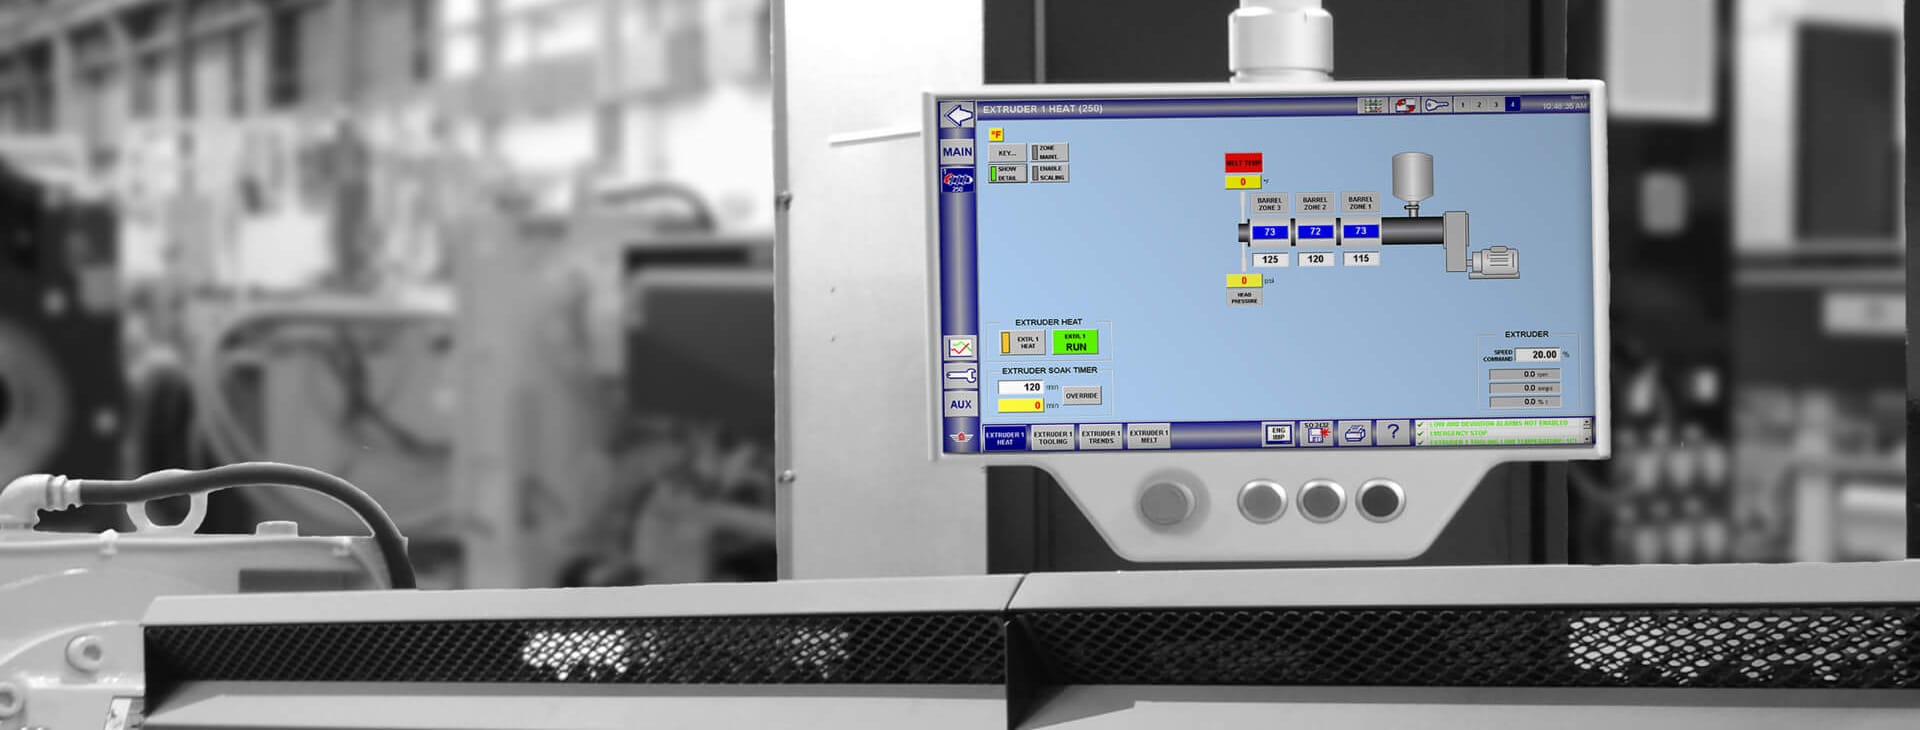 Intuitive pc navigator controls shown on extrusion equipment.